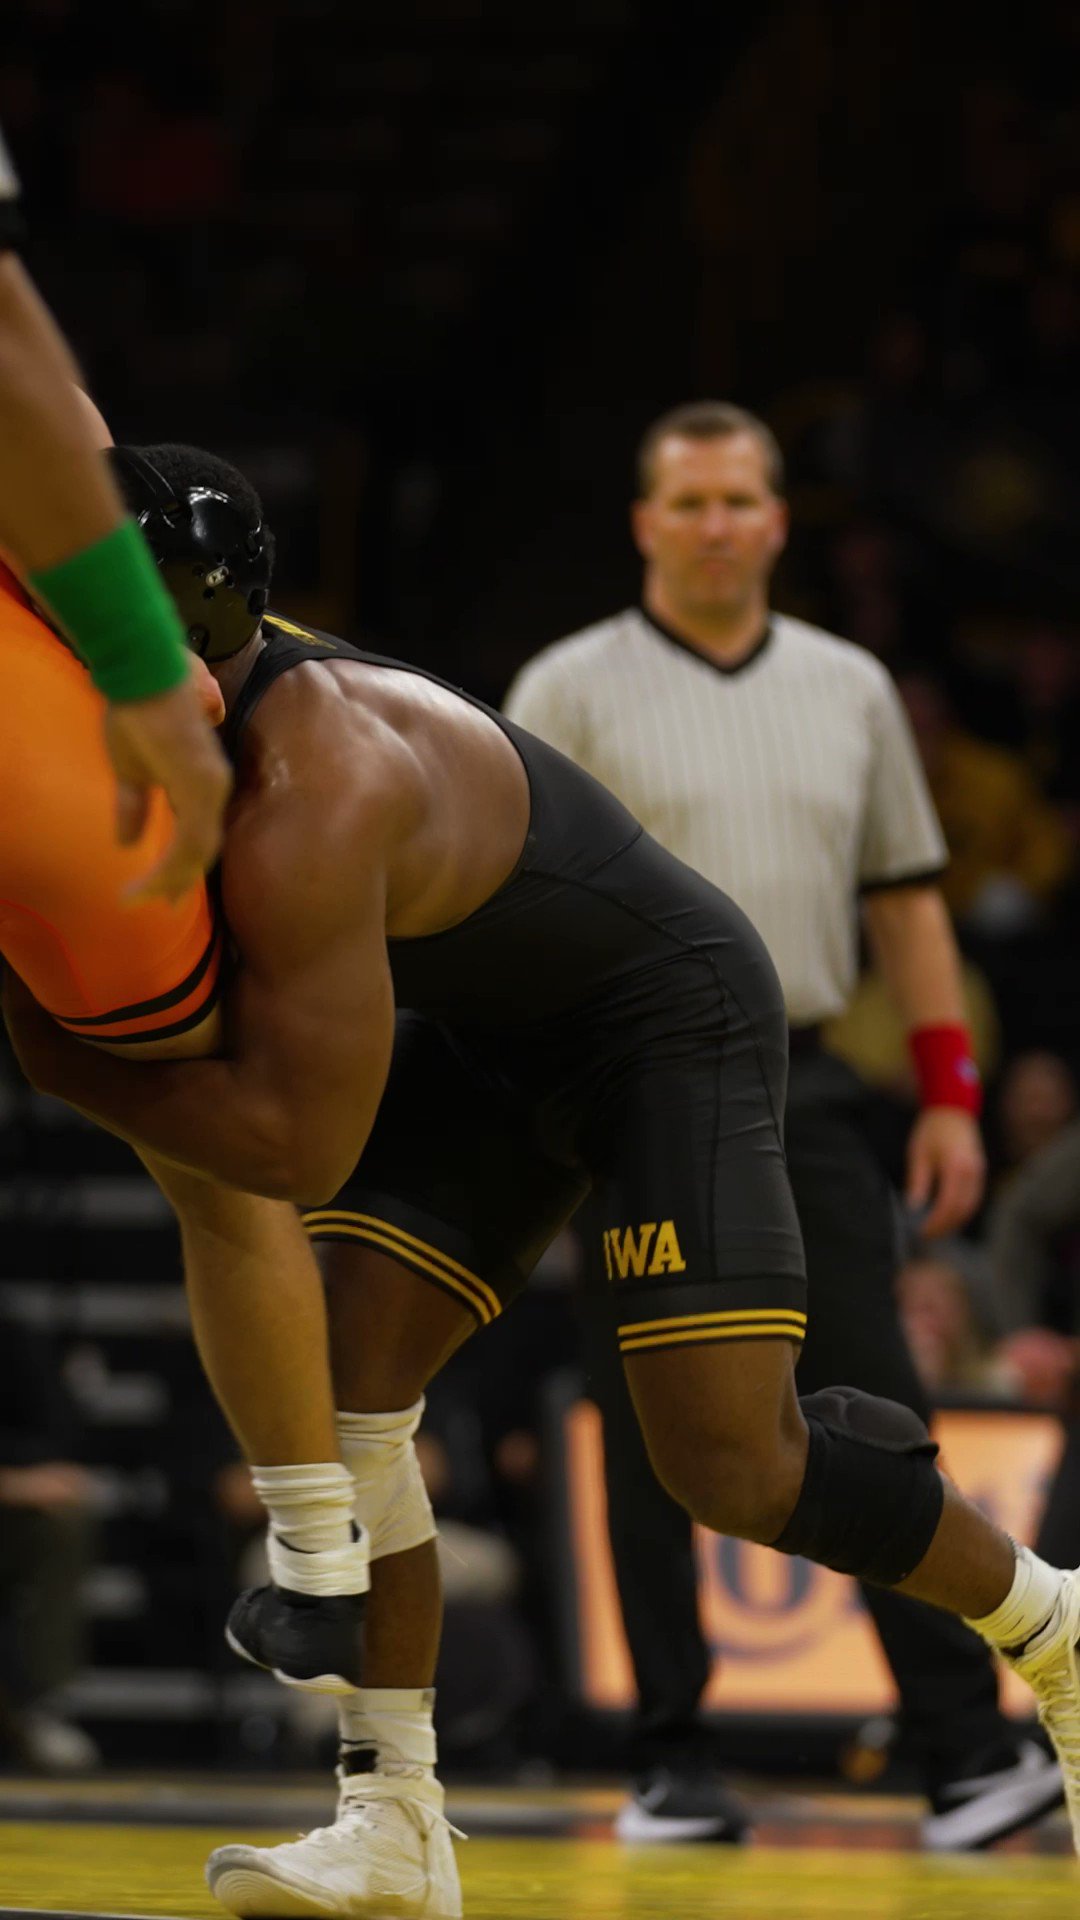 Big Ten Wrestling on X: UPSET at 174! 💥 Gabe Arnold makes his dual debut  for @Hawks_Wrestling and upsets No. 11 Travis Wittlake of Oregon State.   / X